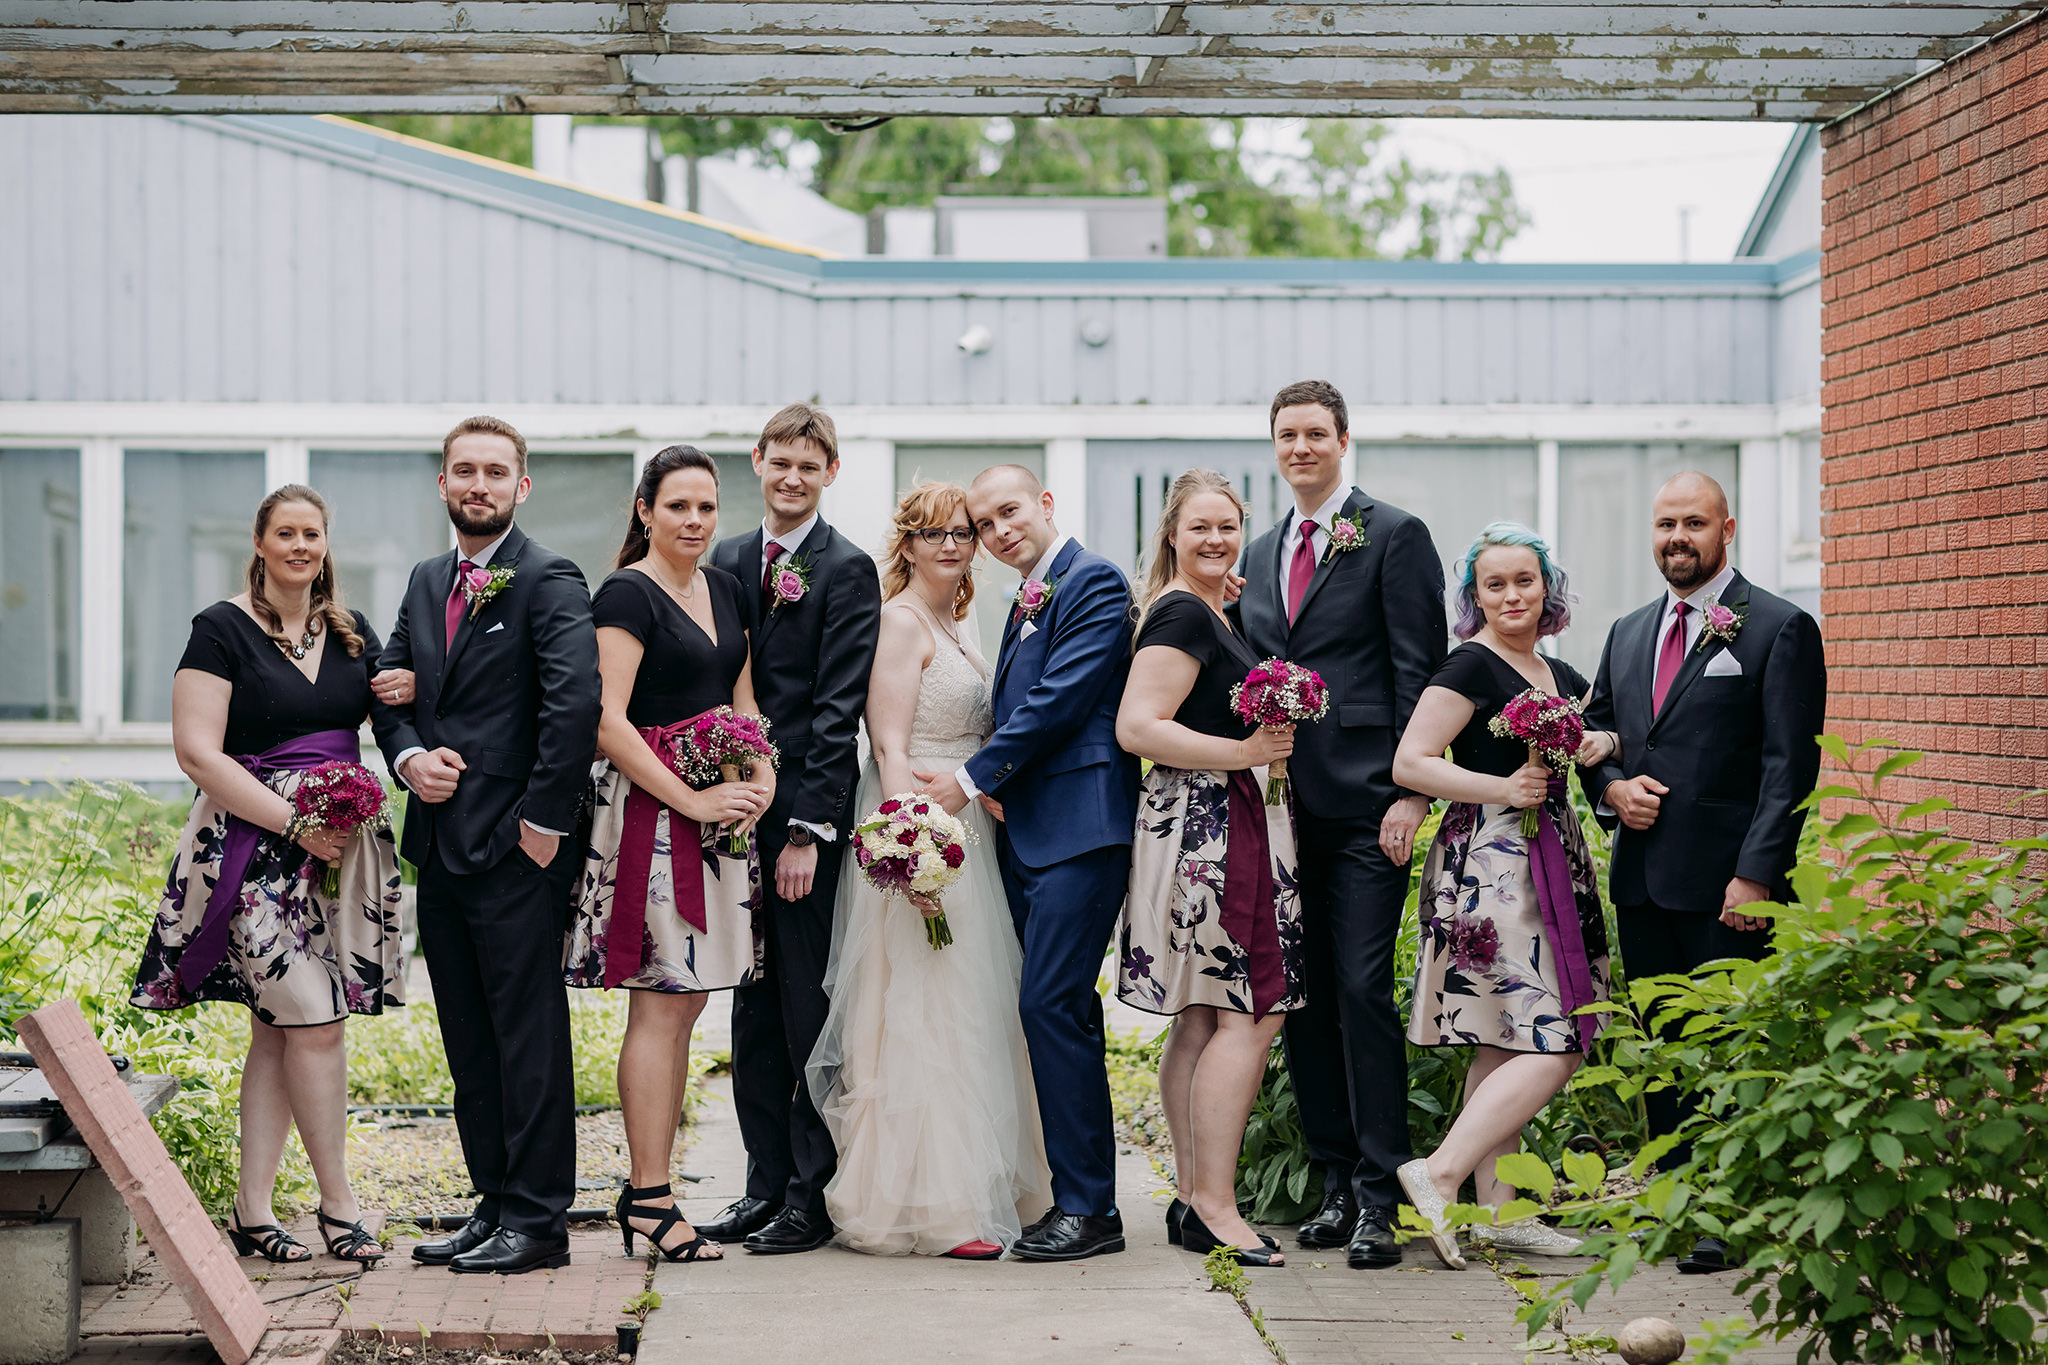 Calgary intimate wedding party portraits in the city with bridesmaids & groomsmen